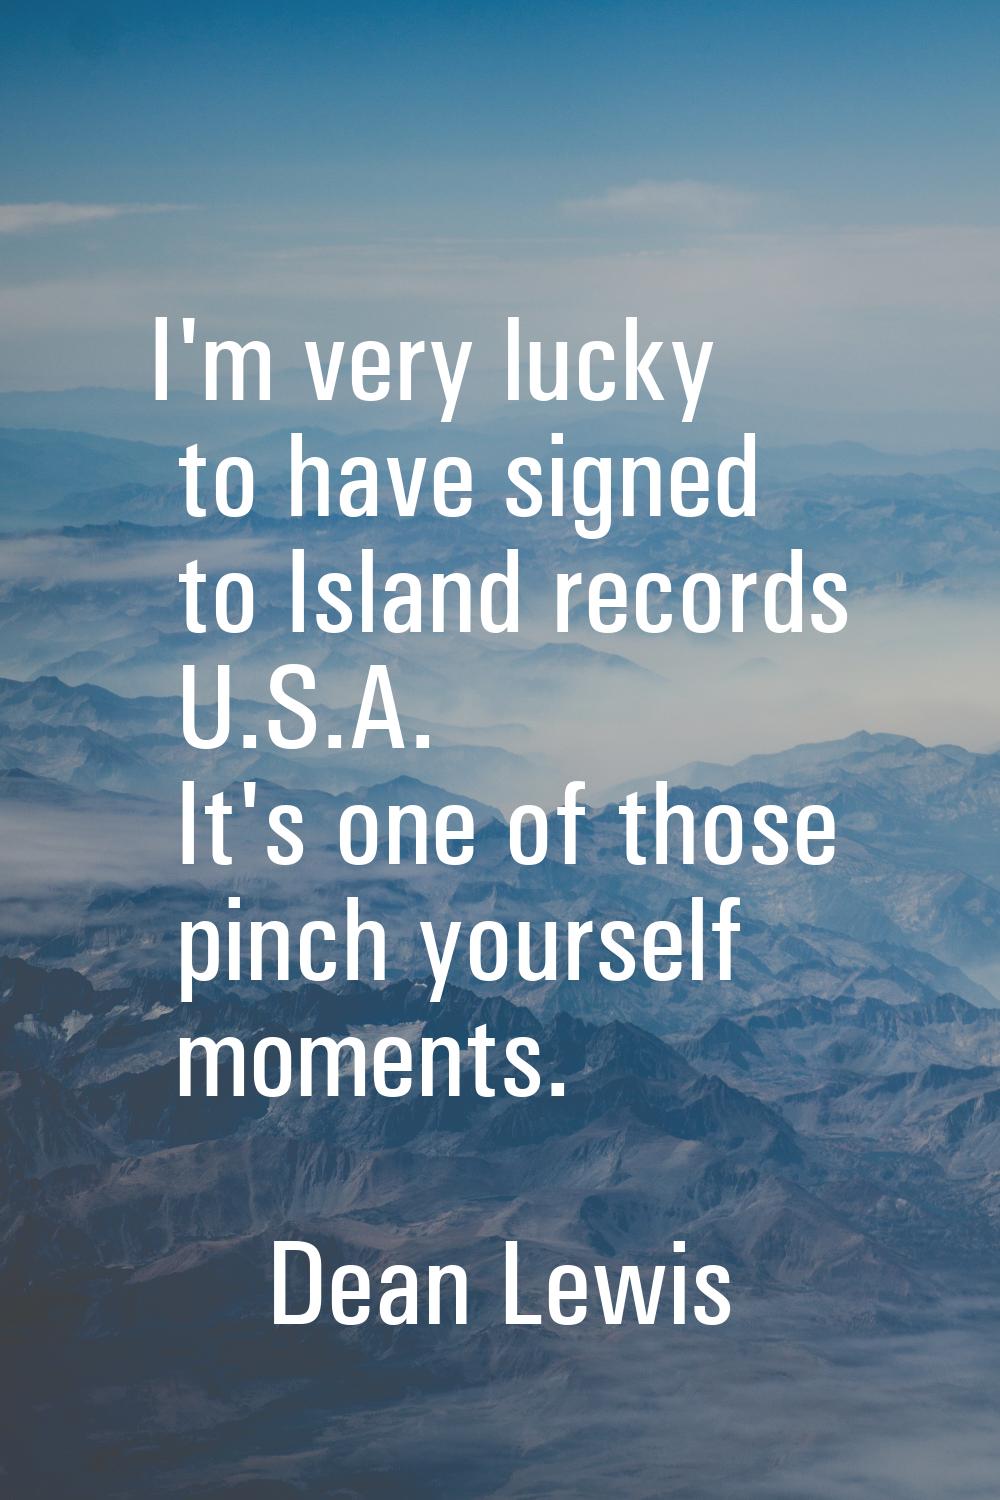 I'm very lucky to have signed to Island records U.S.A. It's one of those pinch yourself moments.